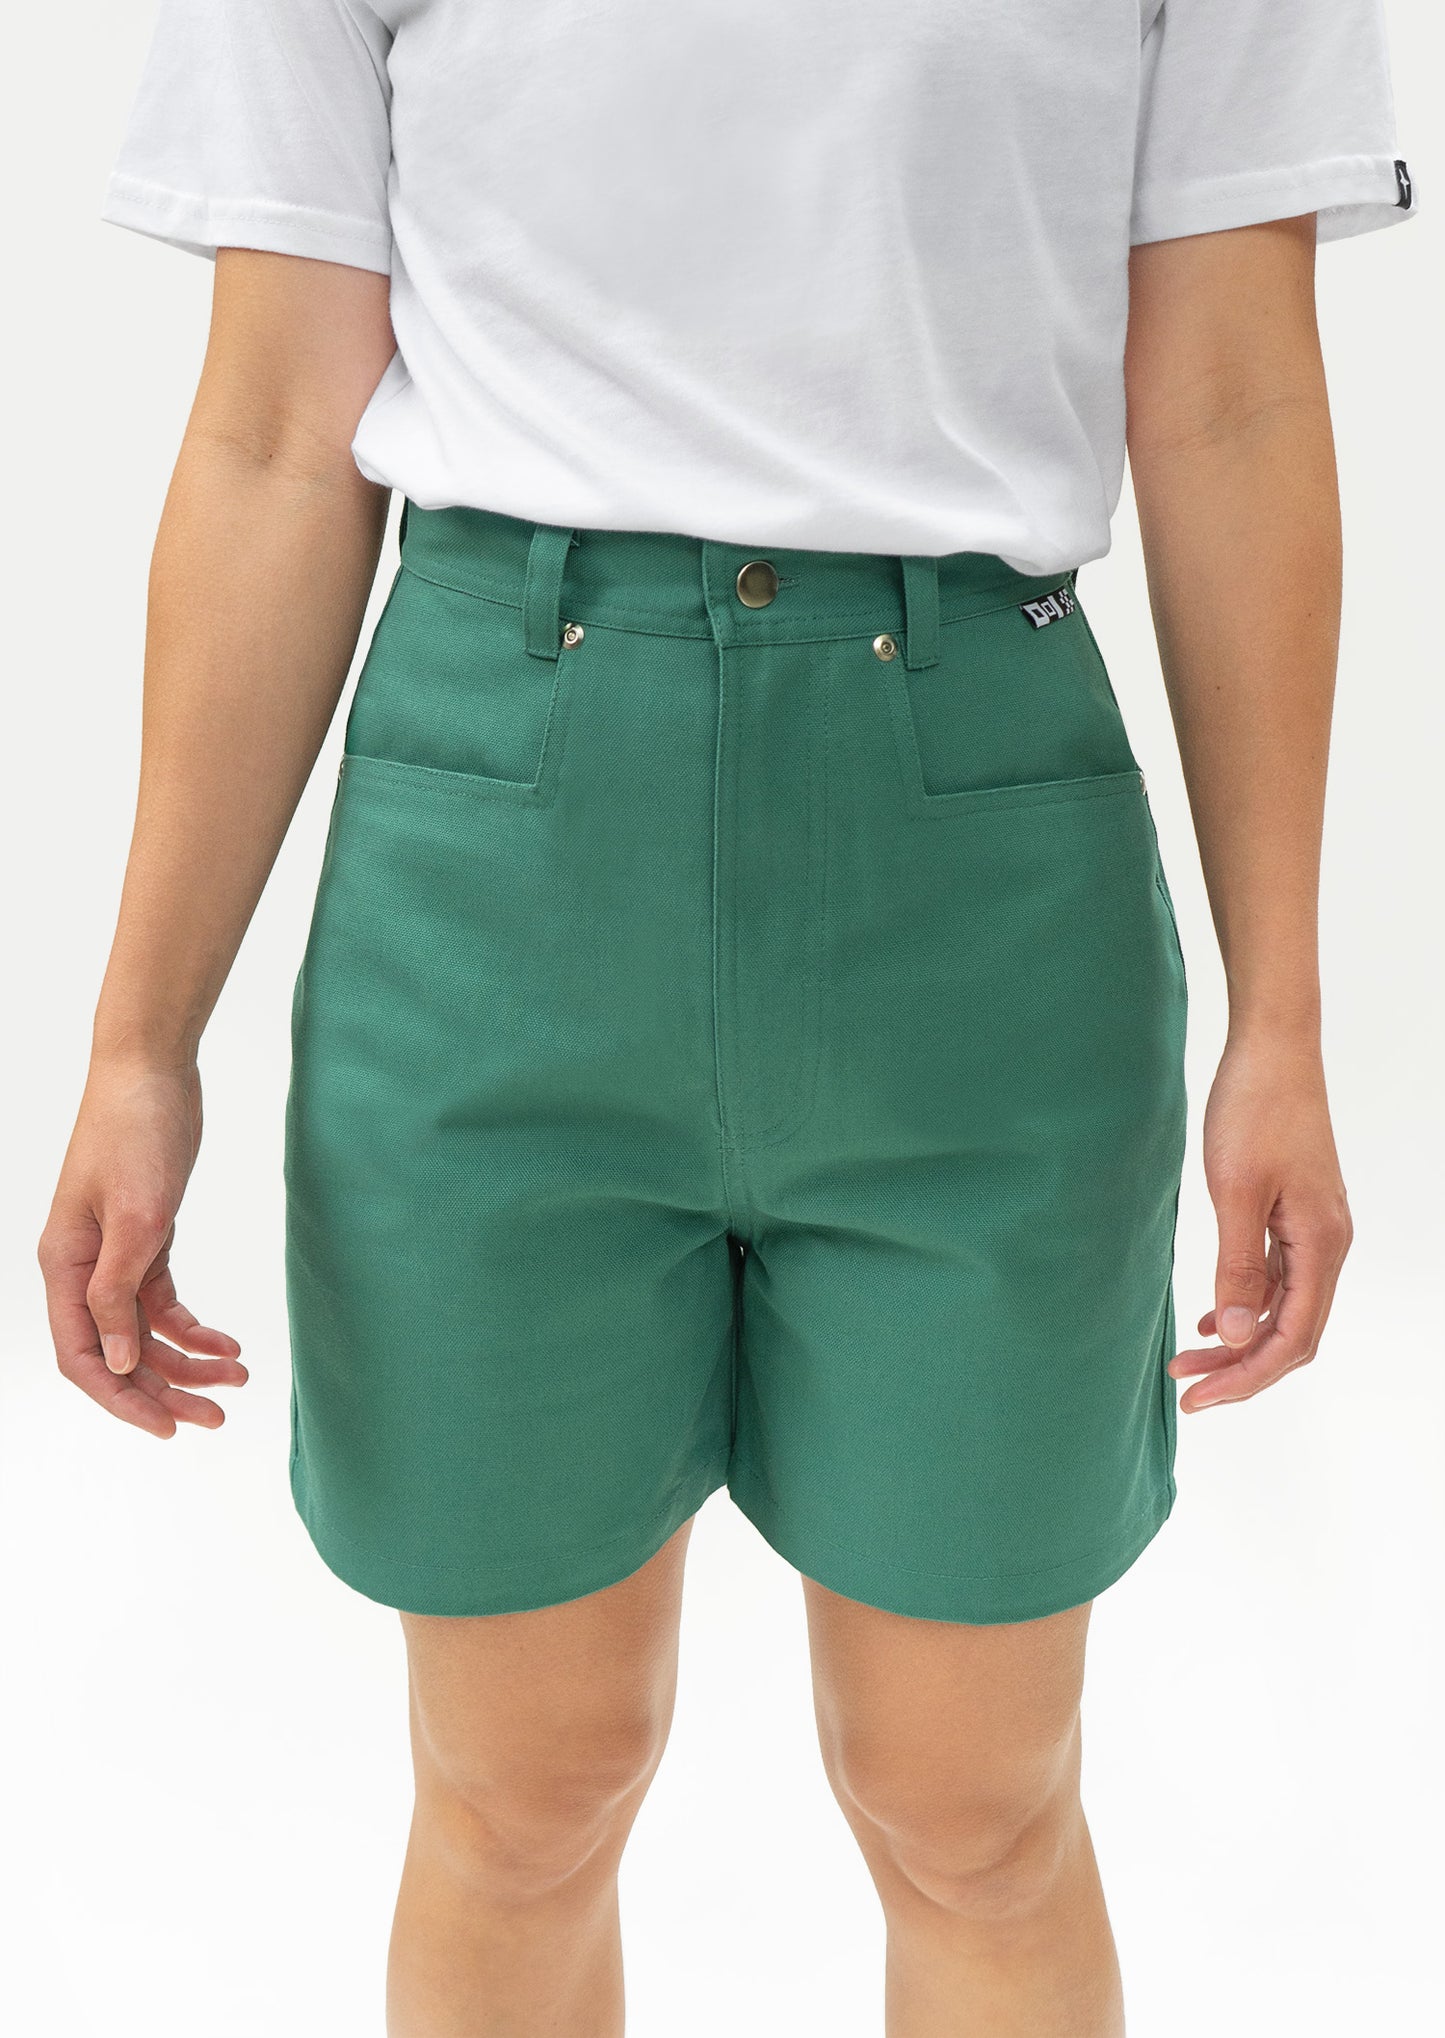 Stay Easy Green Knit High-Waisted Sweater Shorts